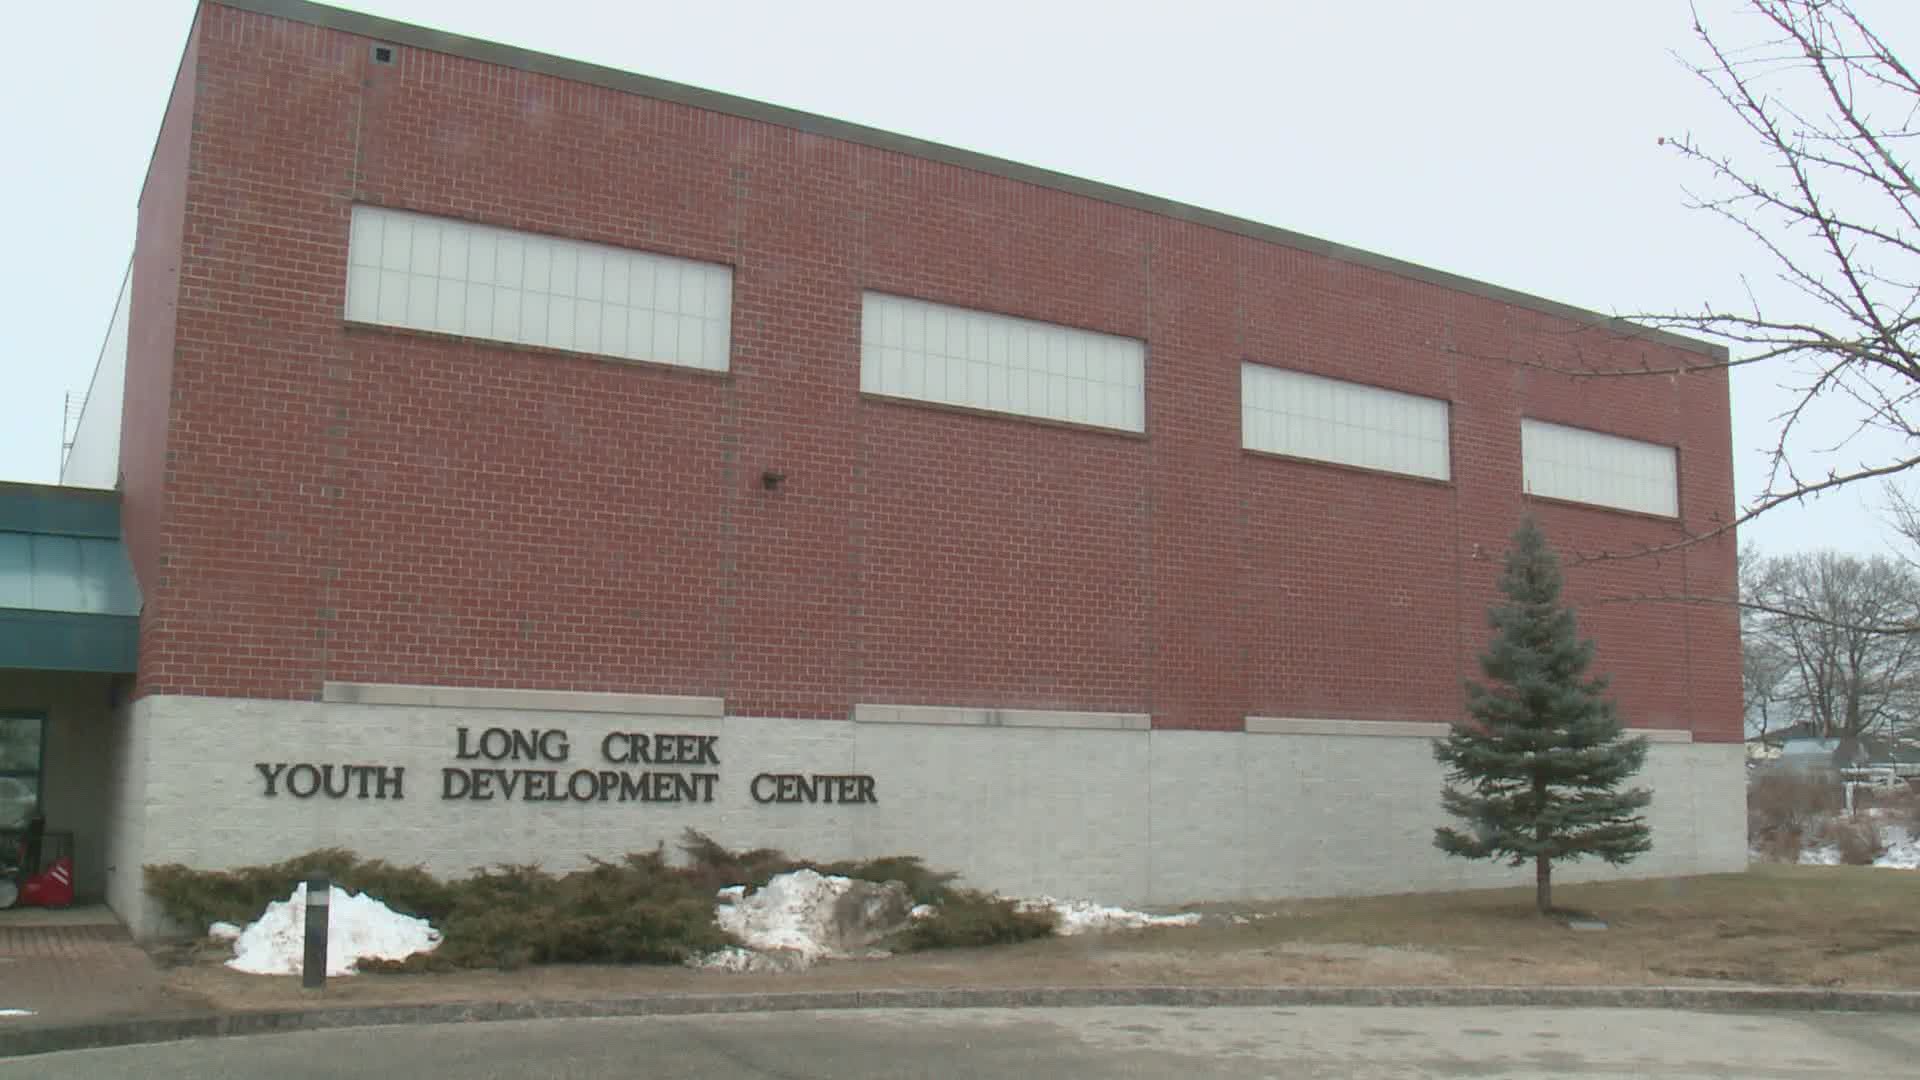 The Maine Department of Corrections says it is initiating universal COVID-19 testing of staff and residents at Long Creek Youth Development Center.